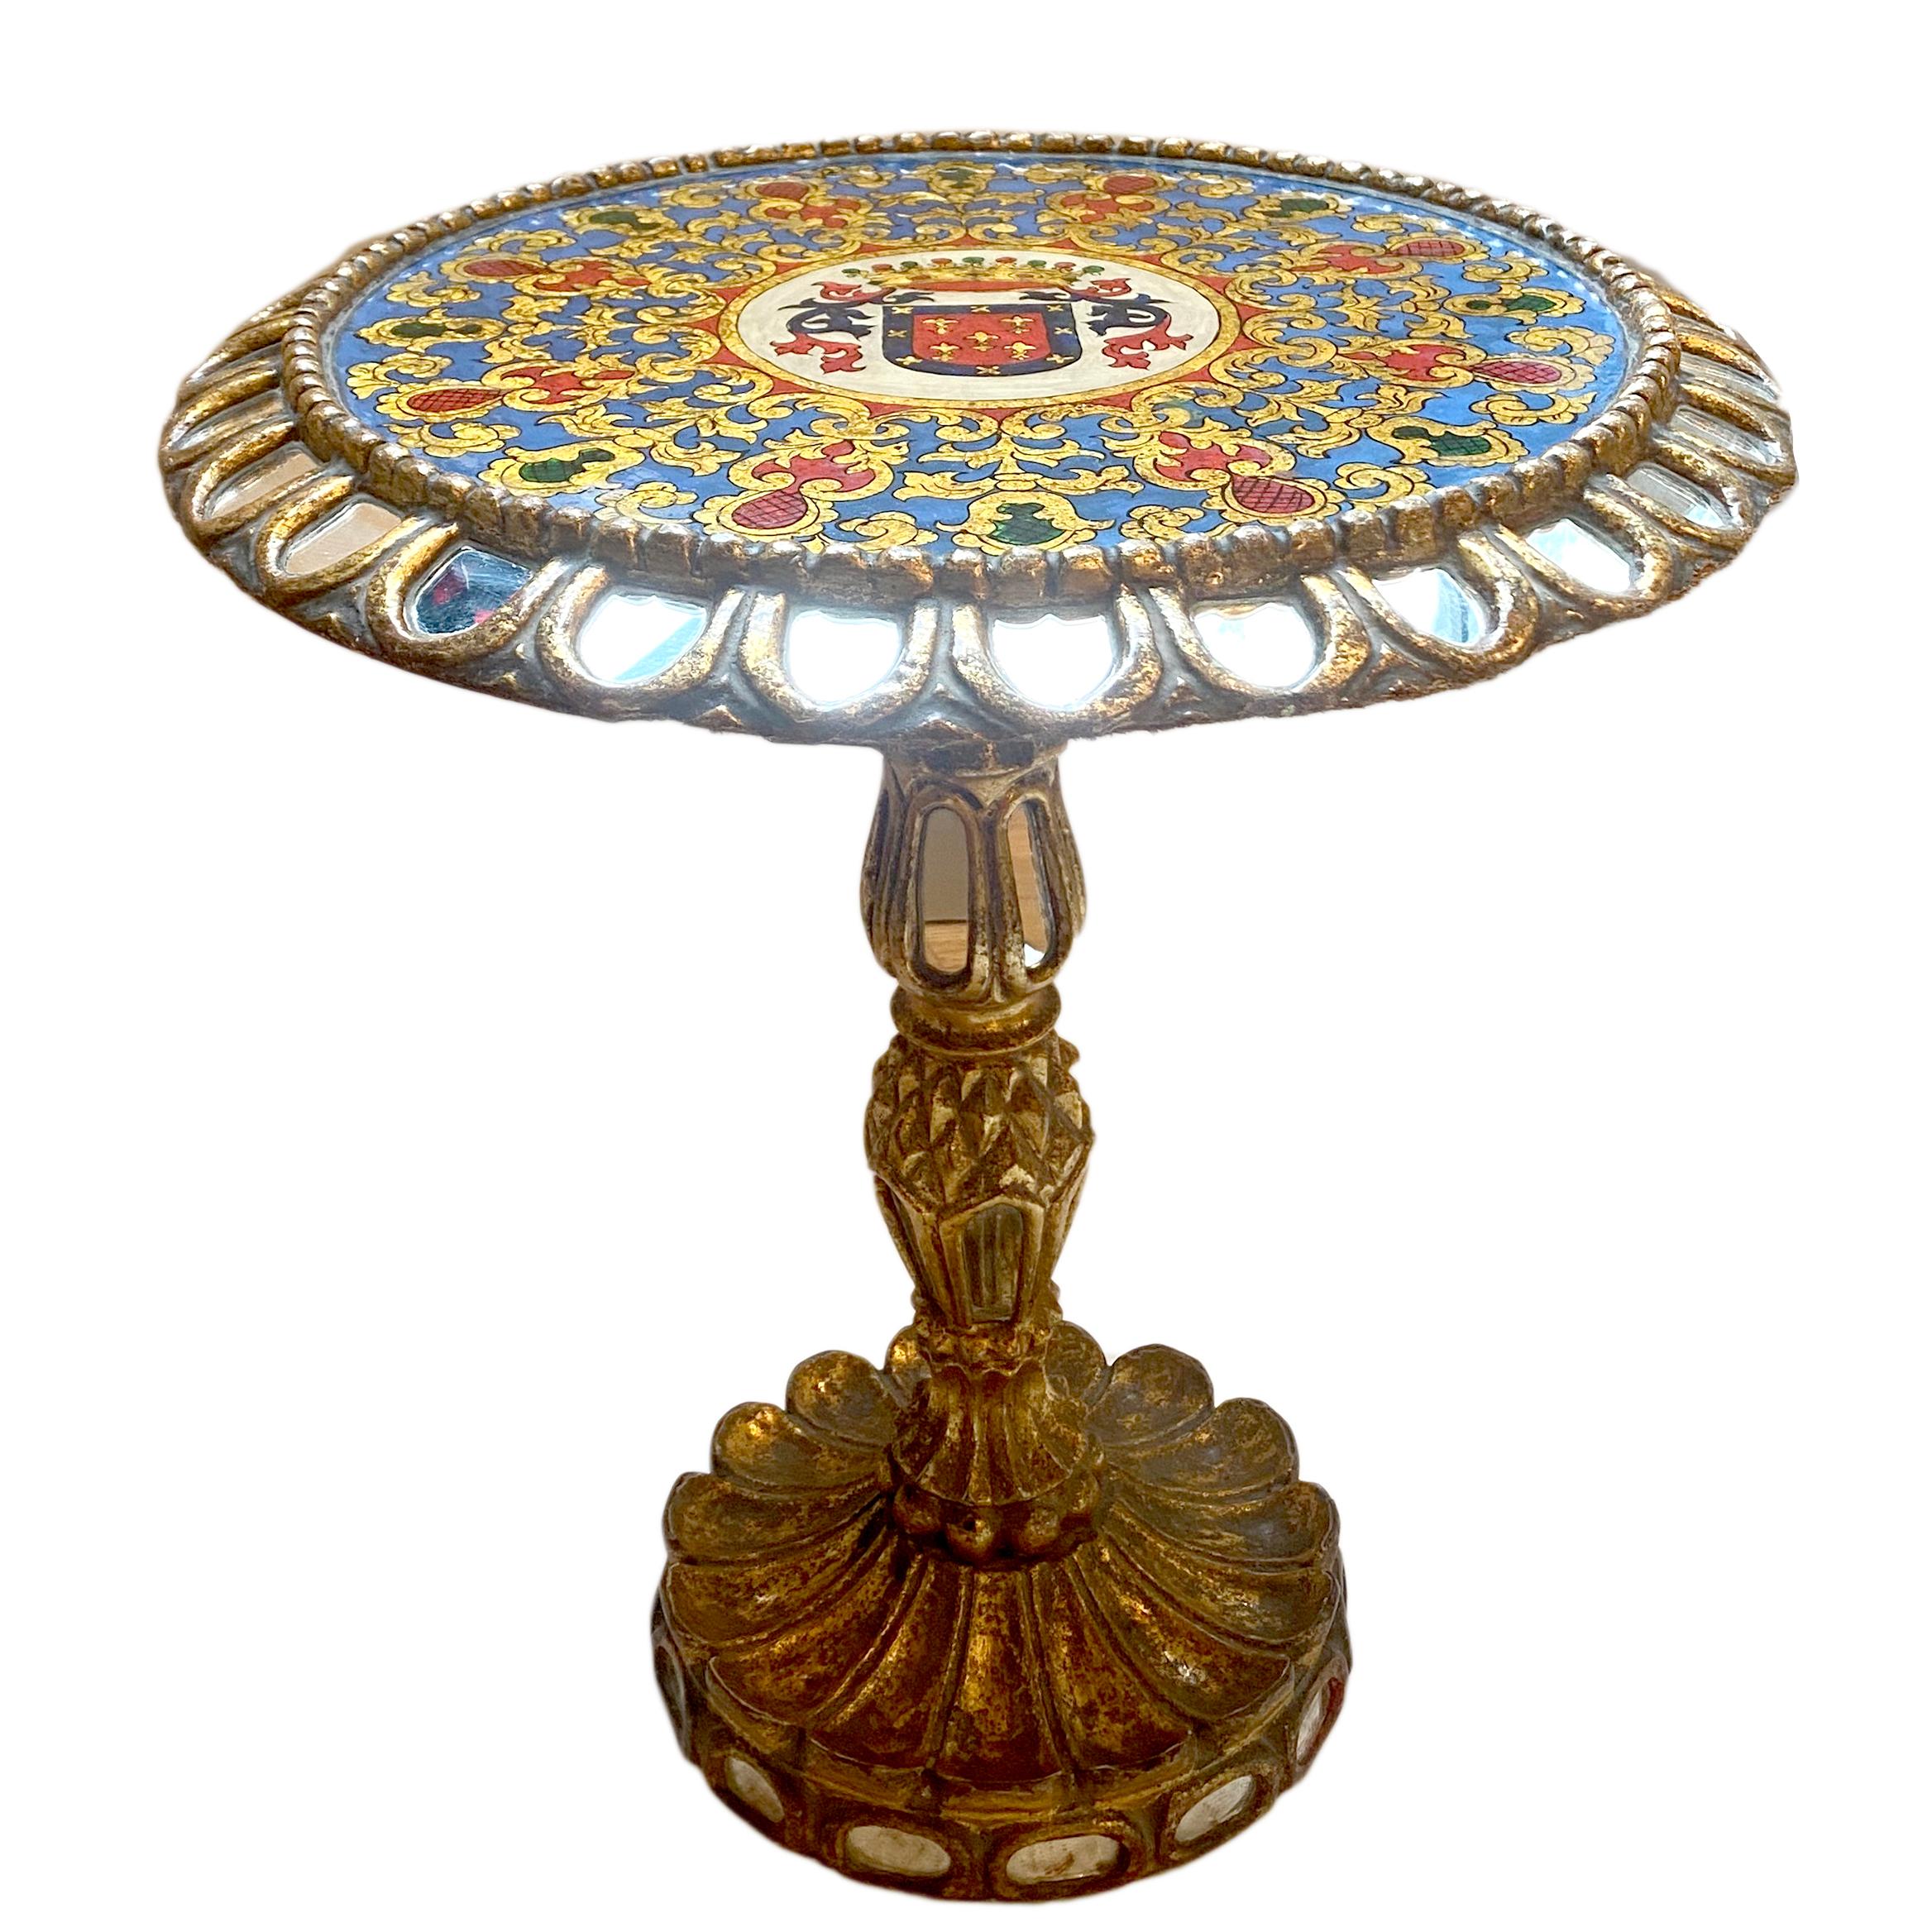 A circa 1920's Spanish table with mirror insets and reverse painted glass top.

Measurements:
Diameter: 19.75